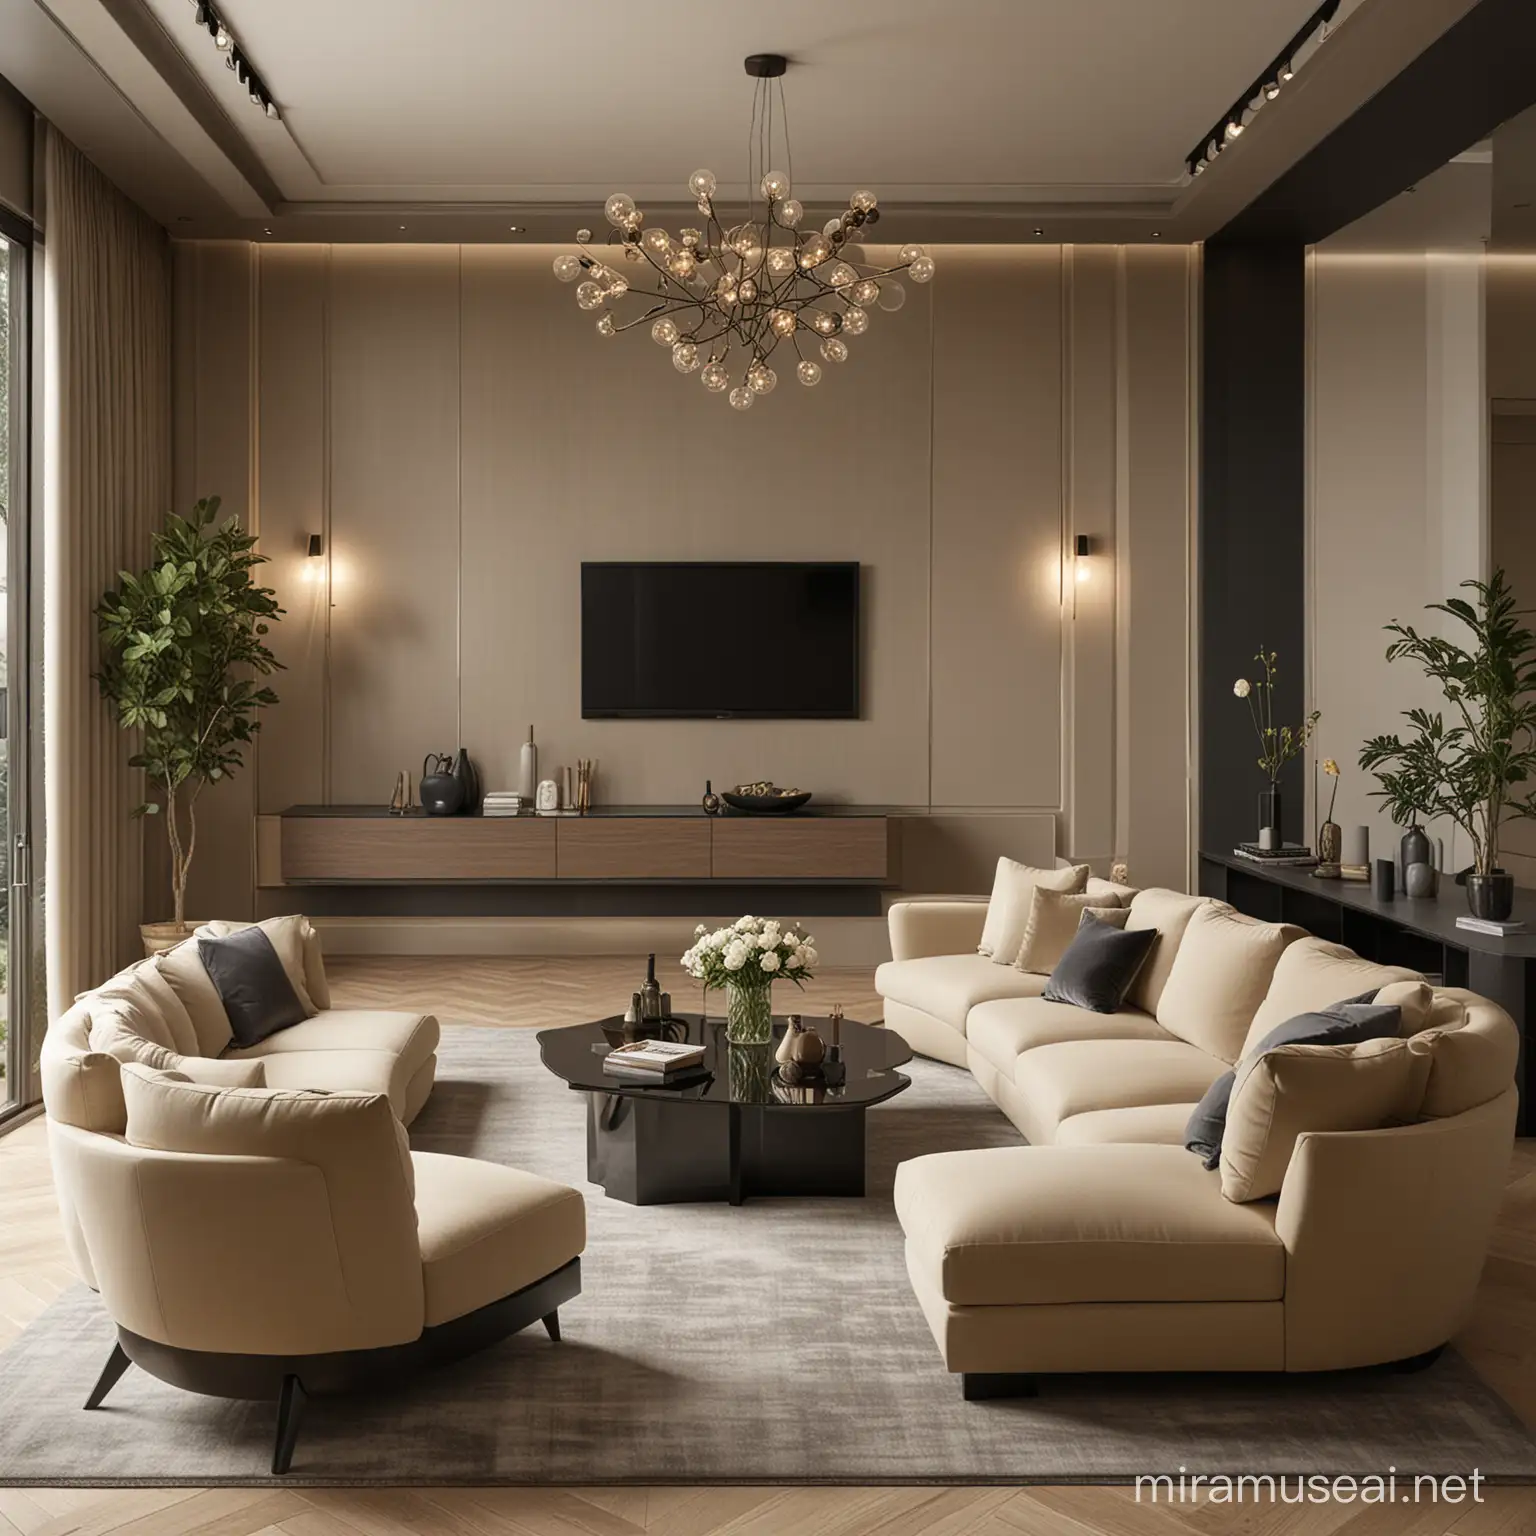 Futuristic Living Room Design 2095 Khaki Anthracite and Champagne Colors with Best Dining and Sofa Set